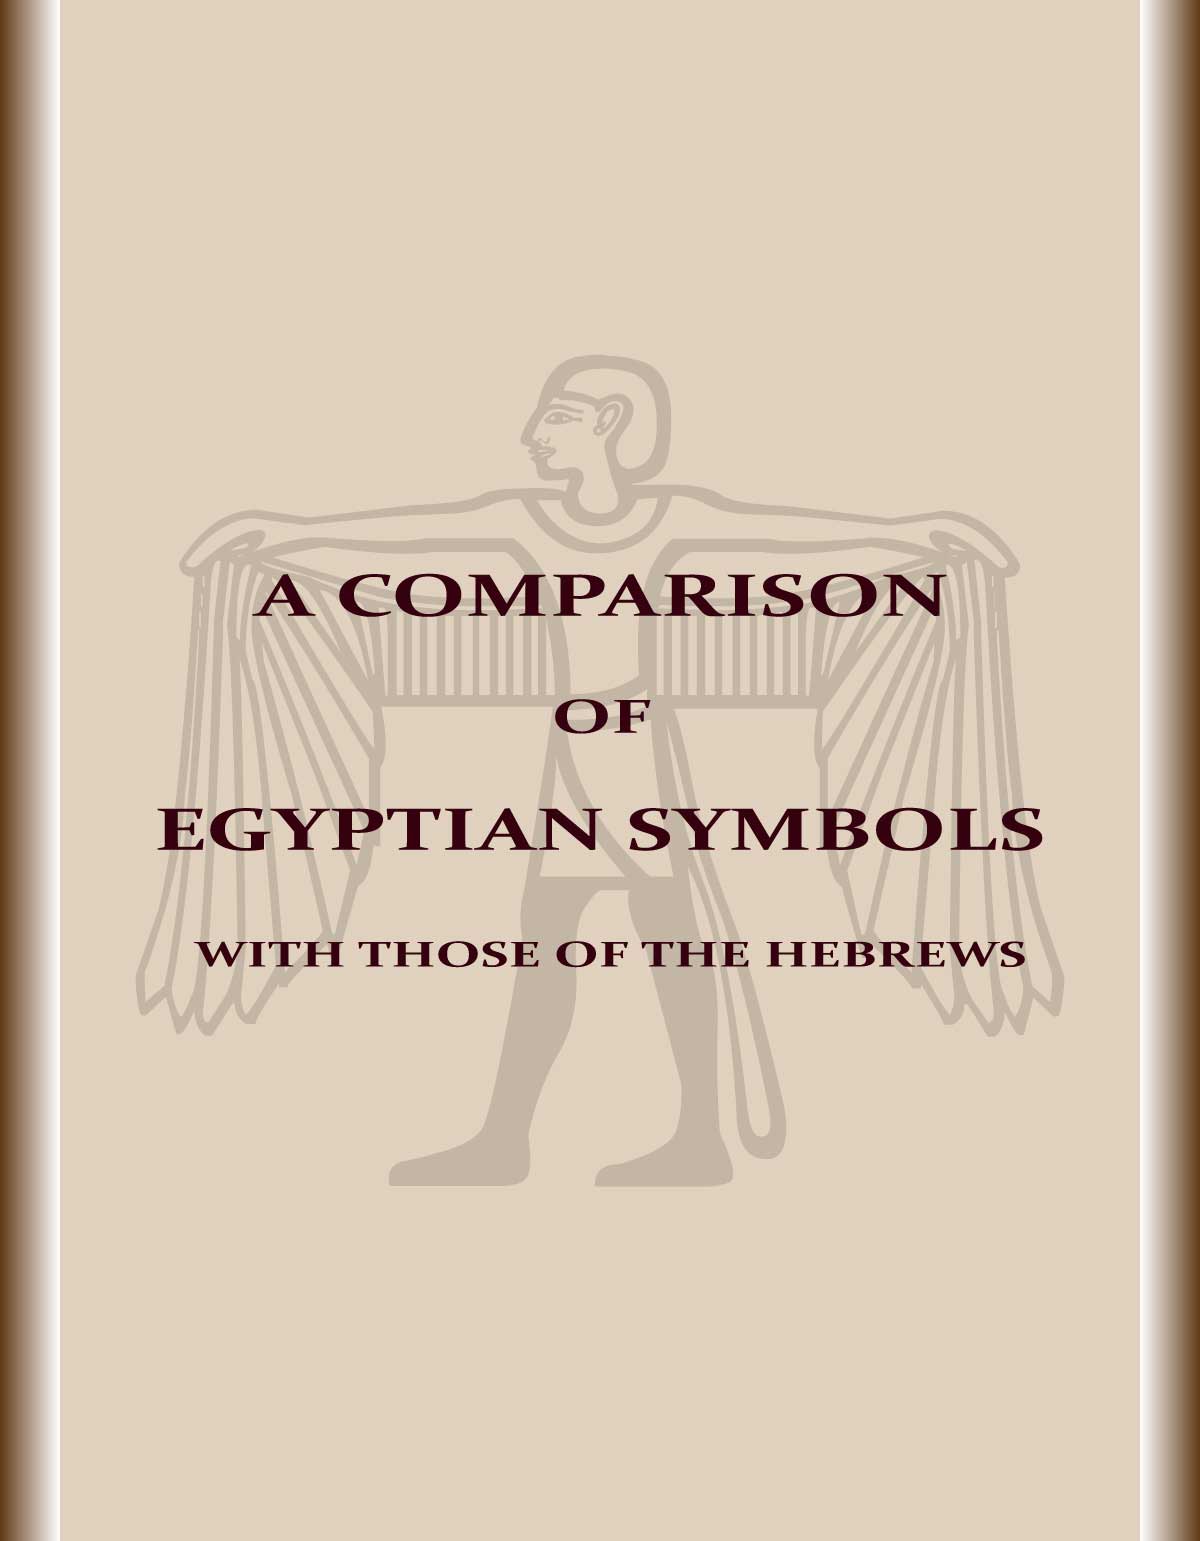 A-comparison-of-Egyptian-symbols-with-those-of-the-Hebrews-book-cover